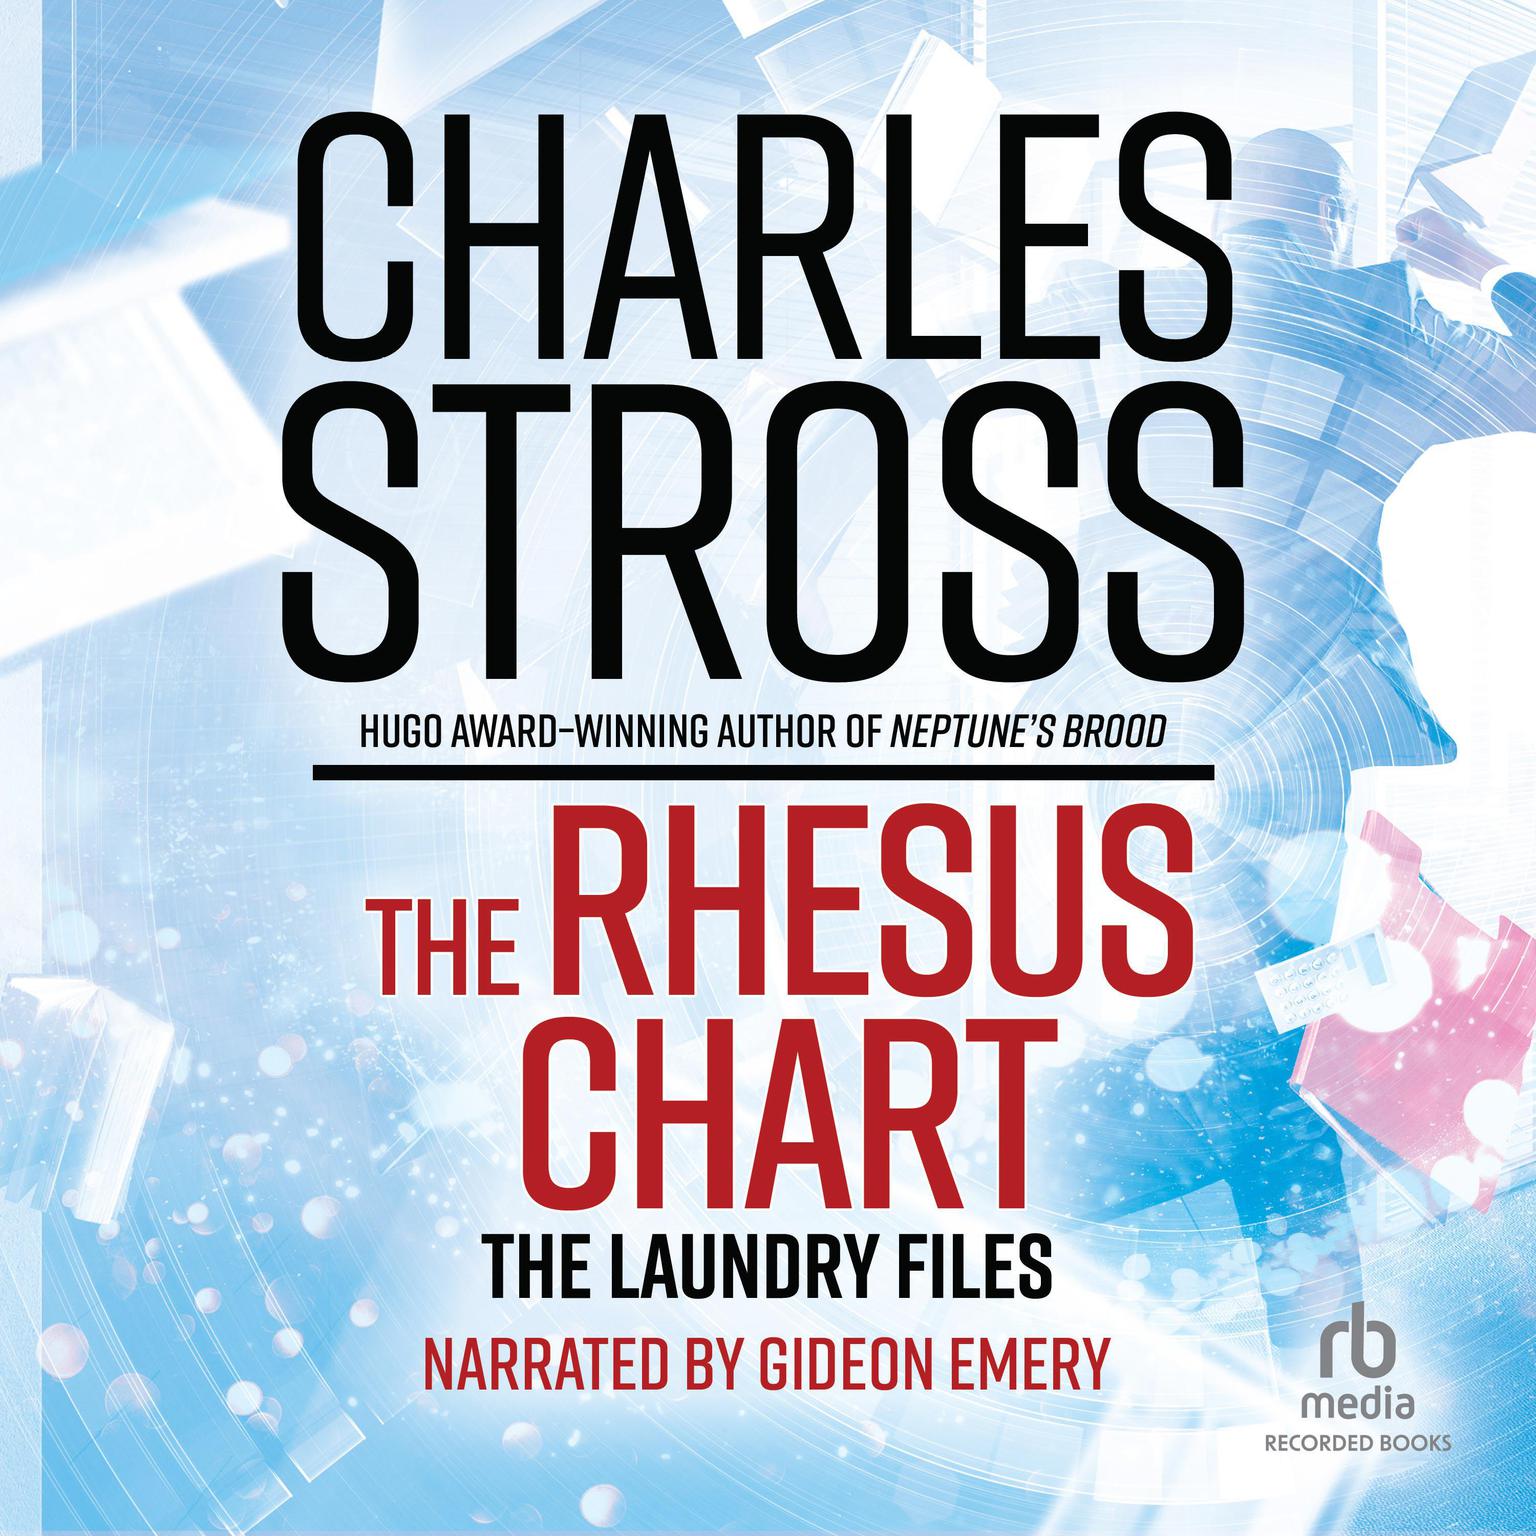 The Rhesus Chart Audiobook, by Charles Stross